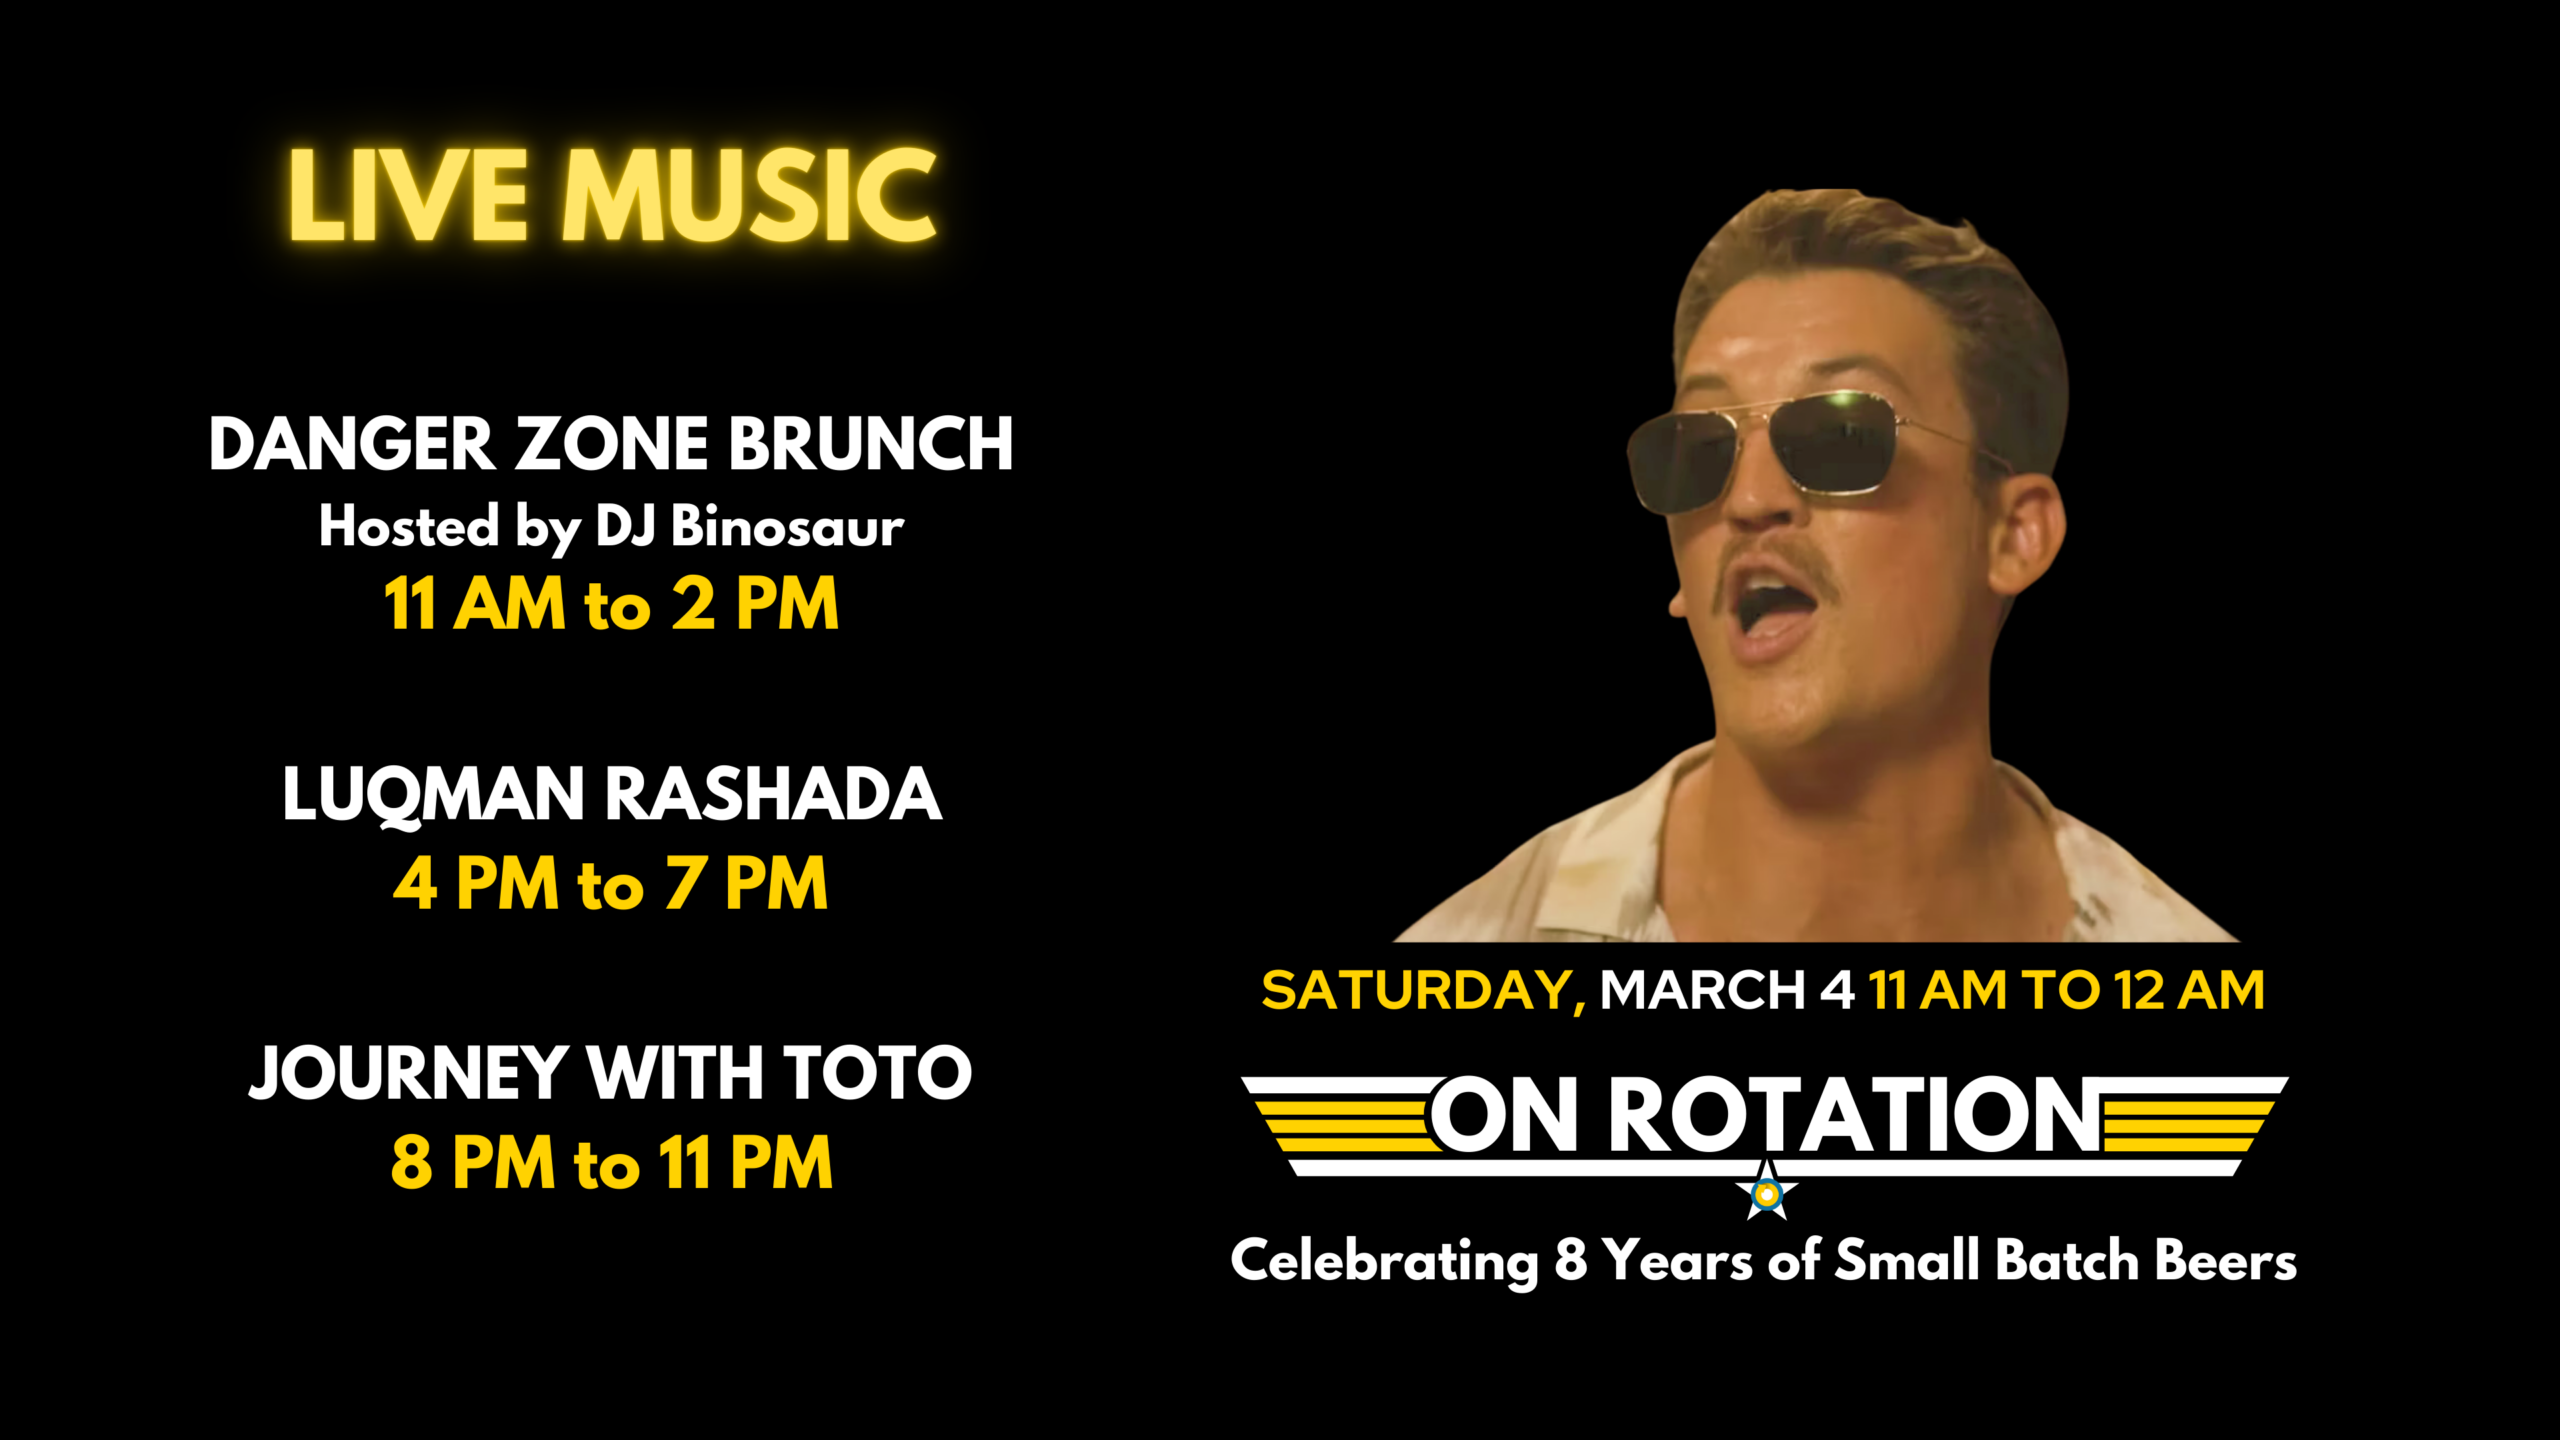 On Rotation's LIVE MUSIC schedule for 8-Year Anniversary Party